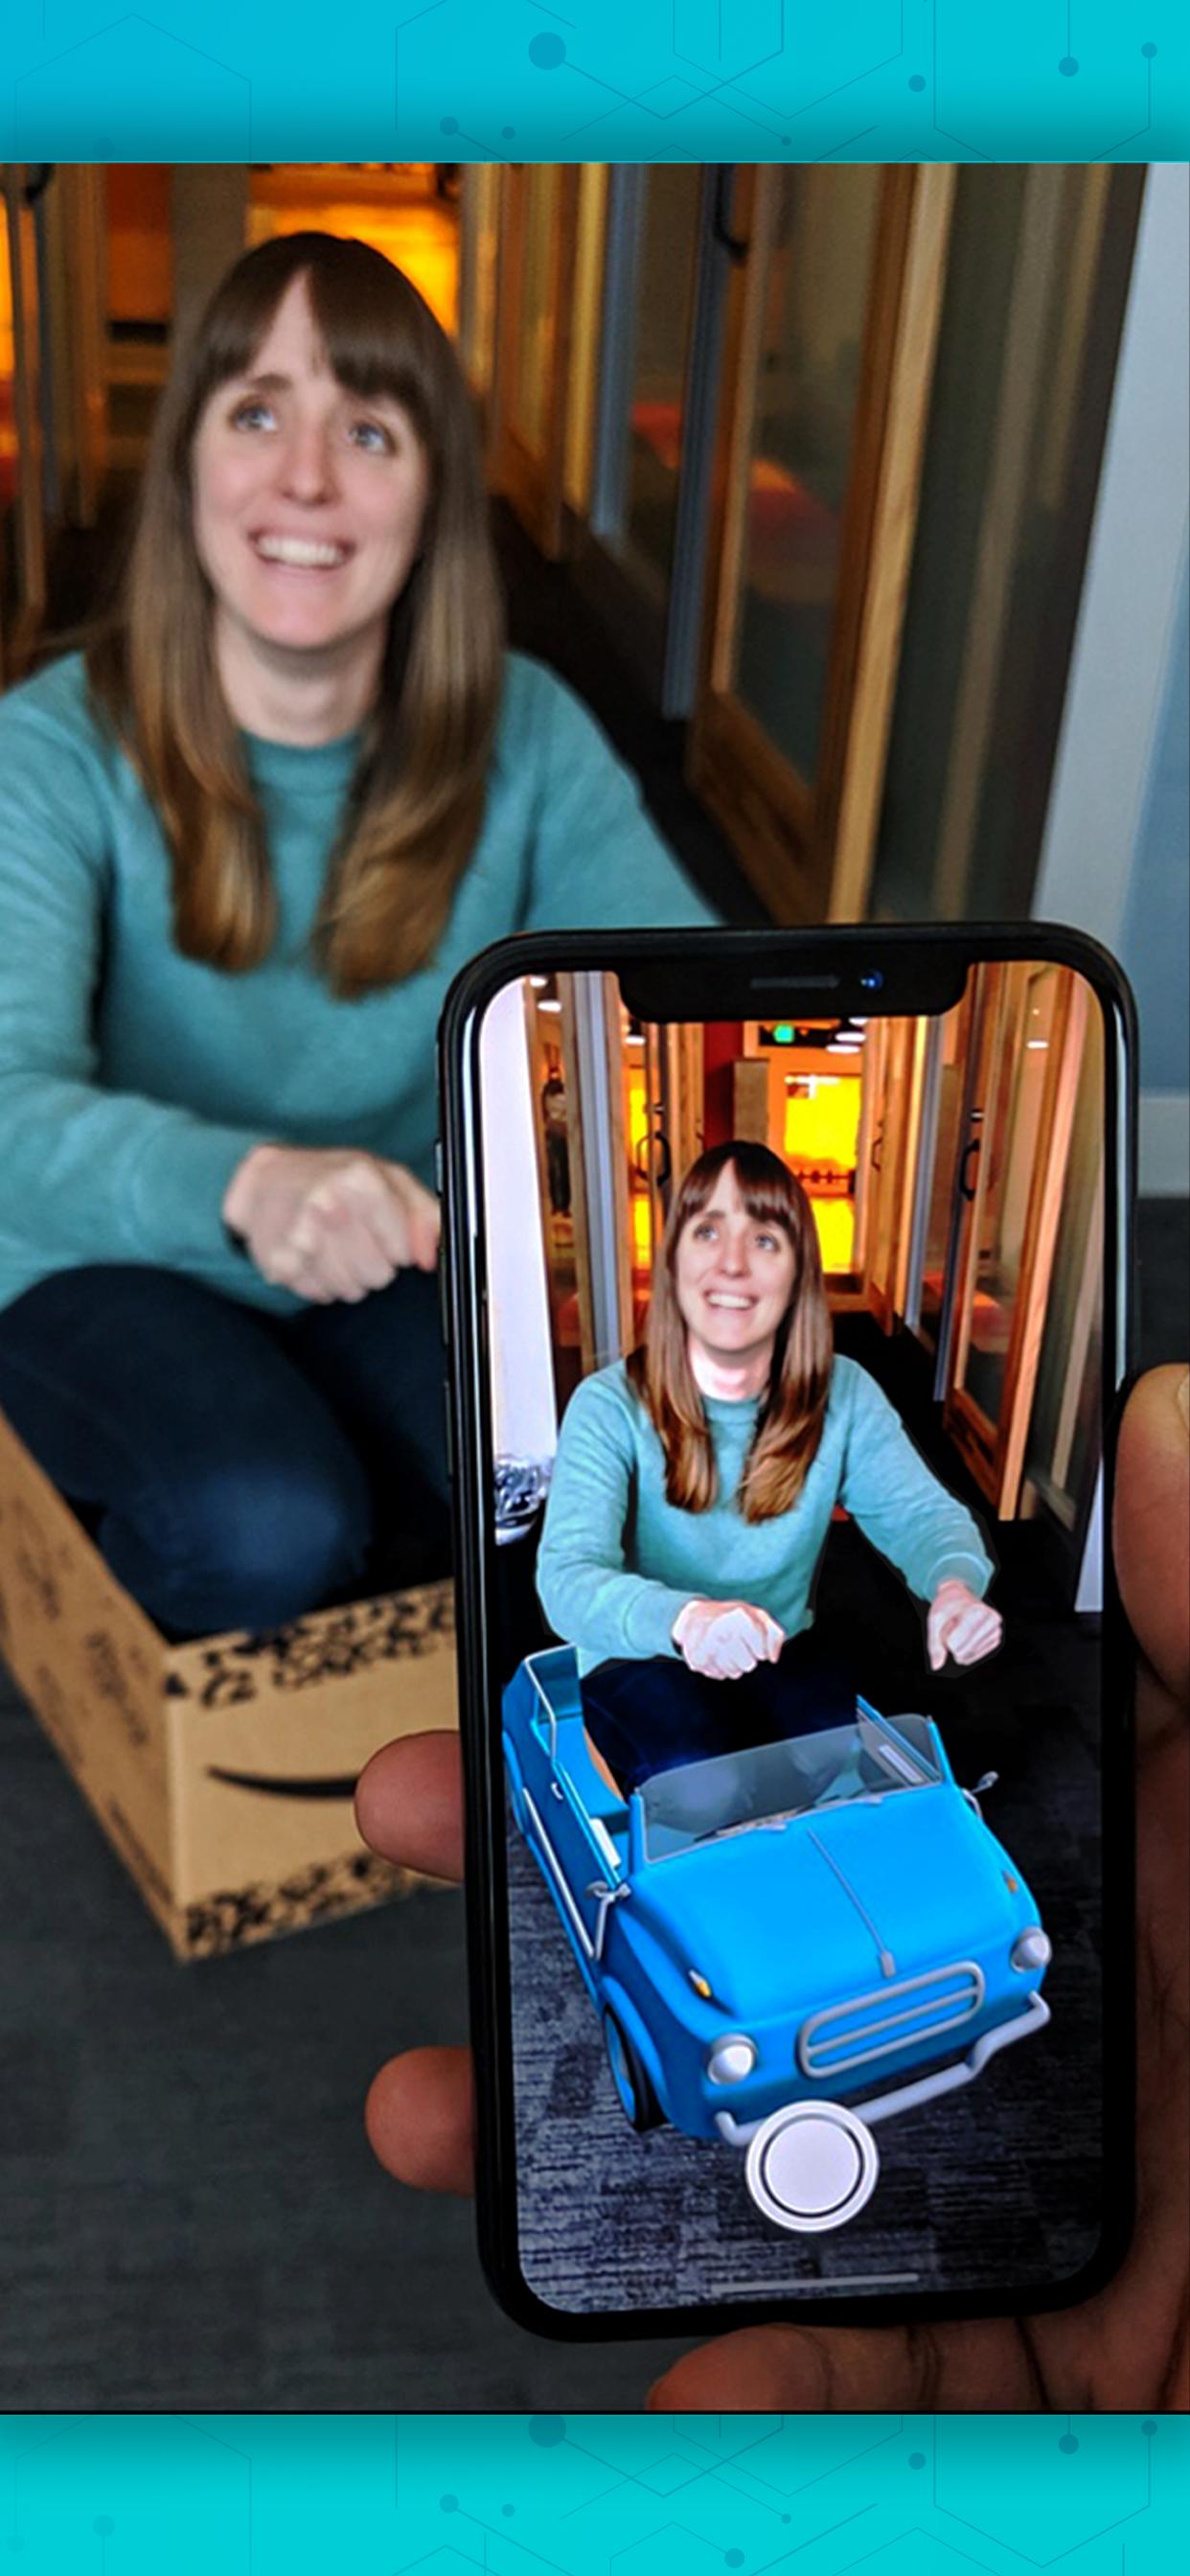 Amazon AR for Android - APK Download